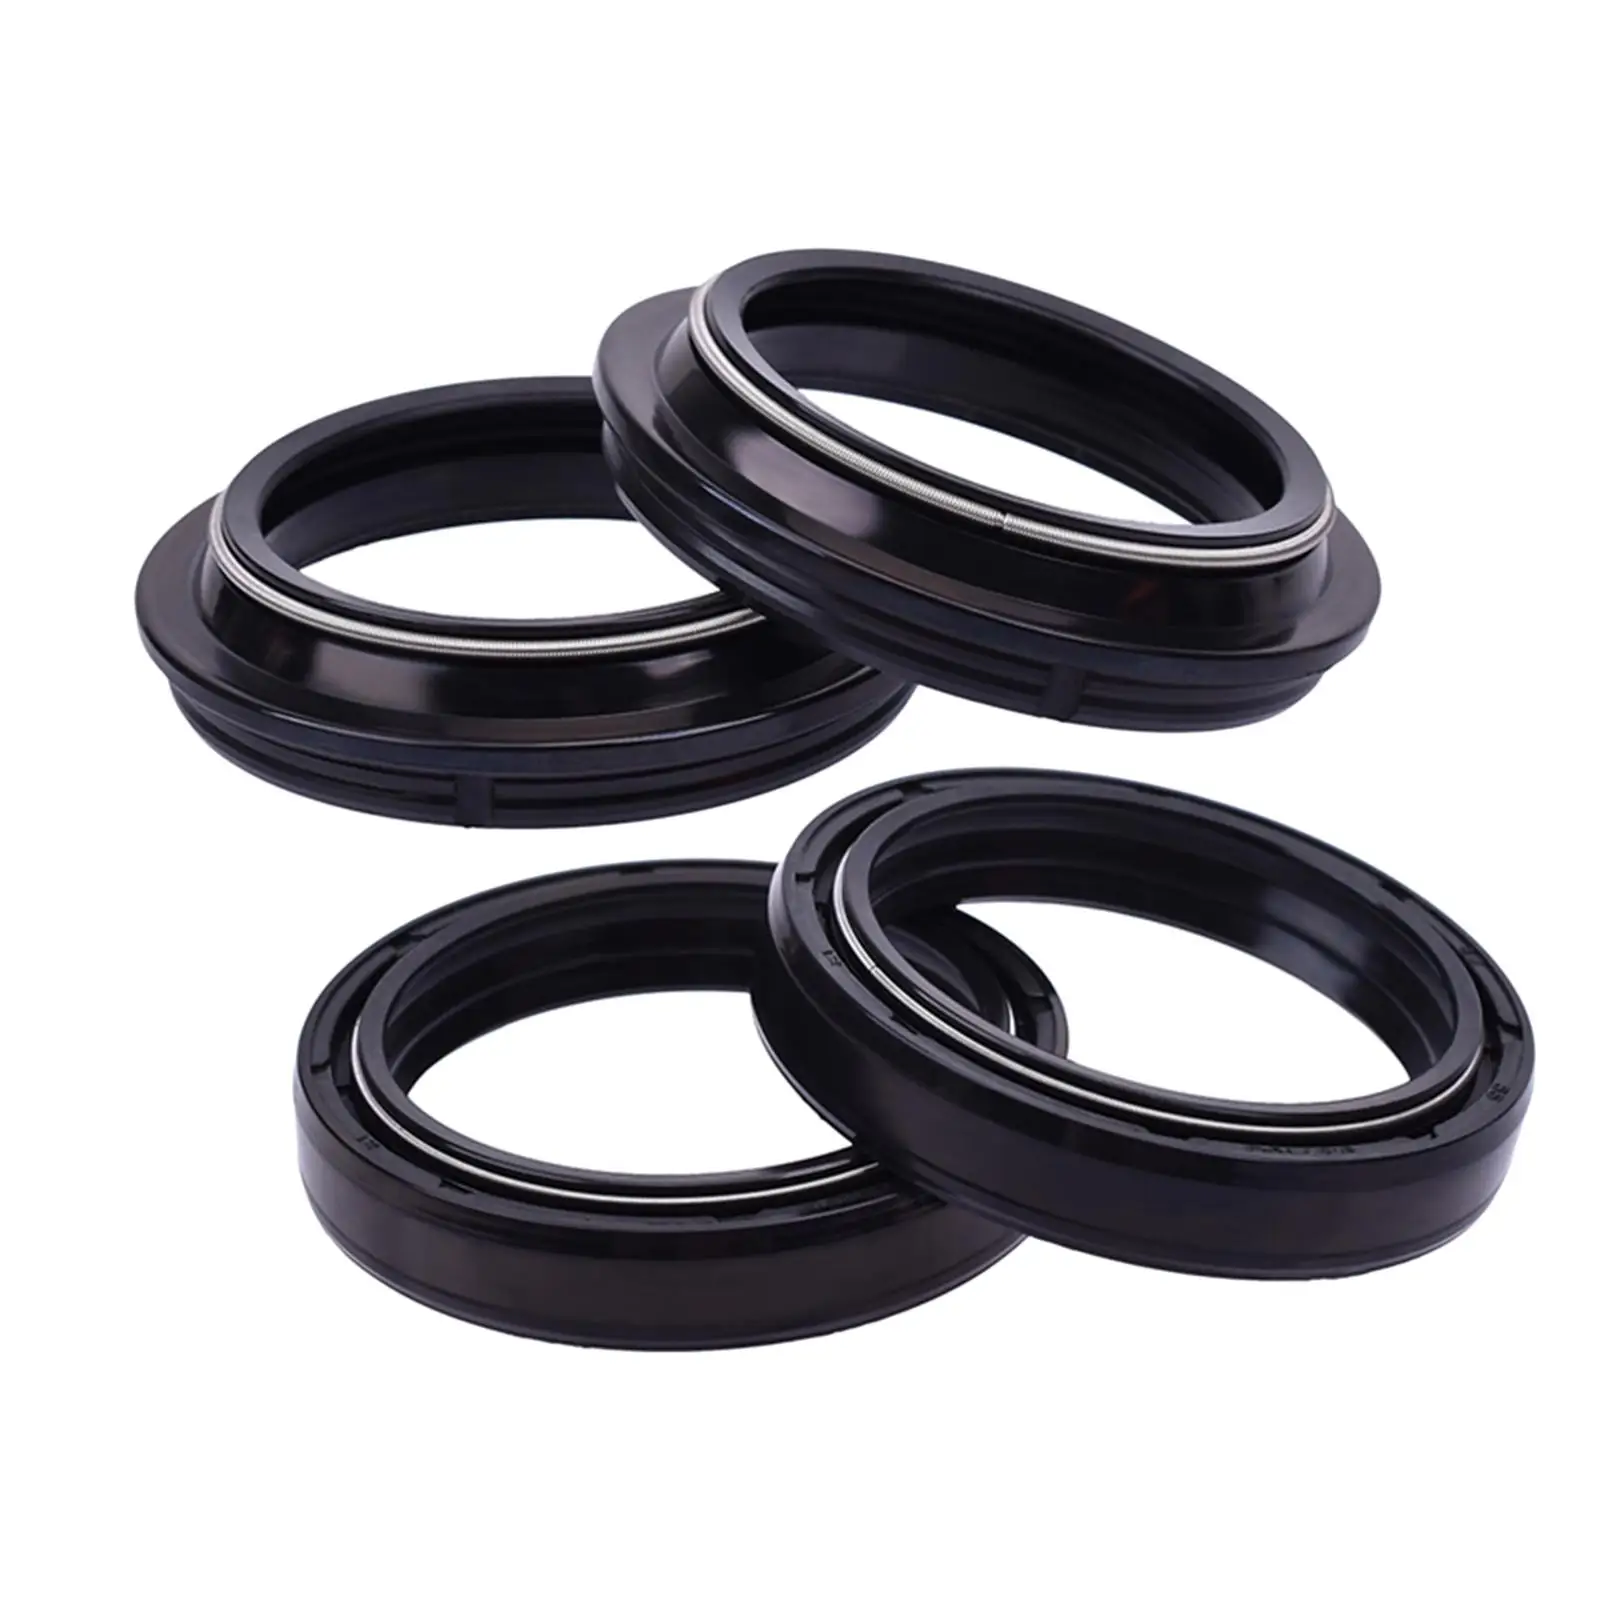 Fork and Dust Seal Rubber for CR250R Crf250R Motocross Nsr500